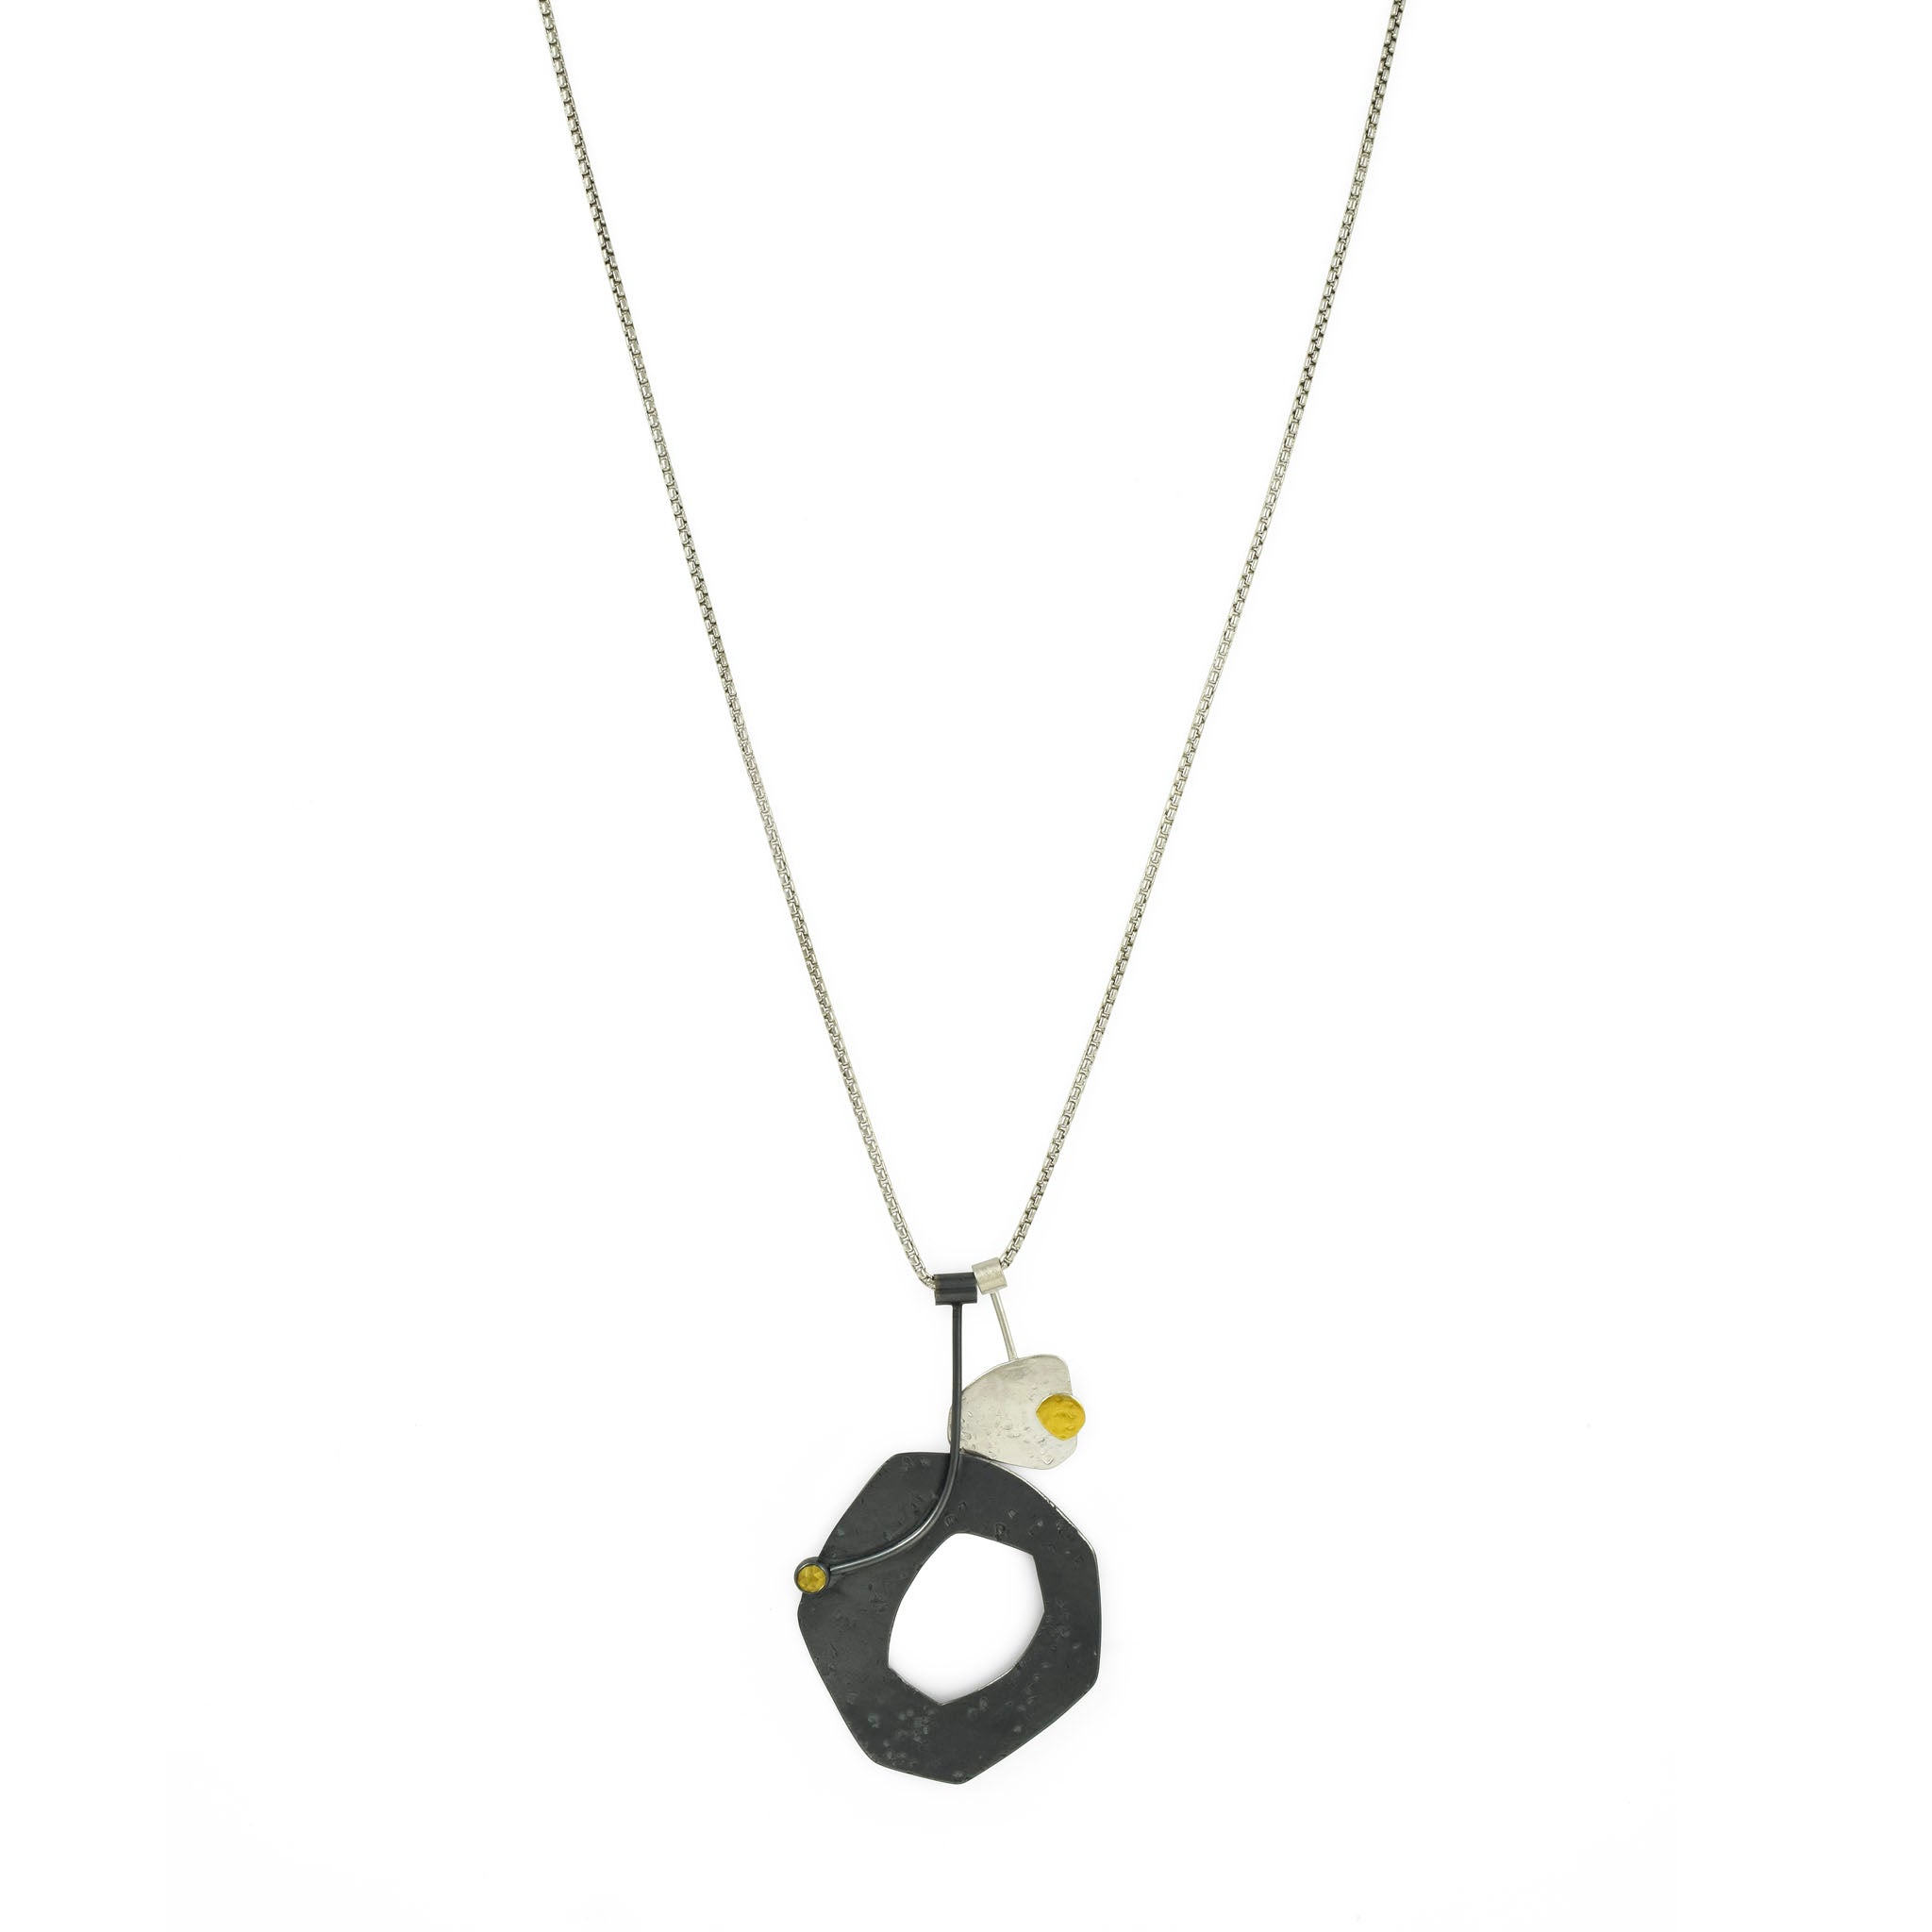 Together Oxidized Silver and Gold Pendant Necklace